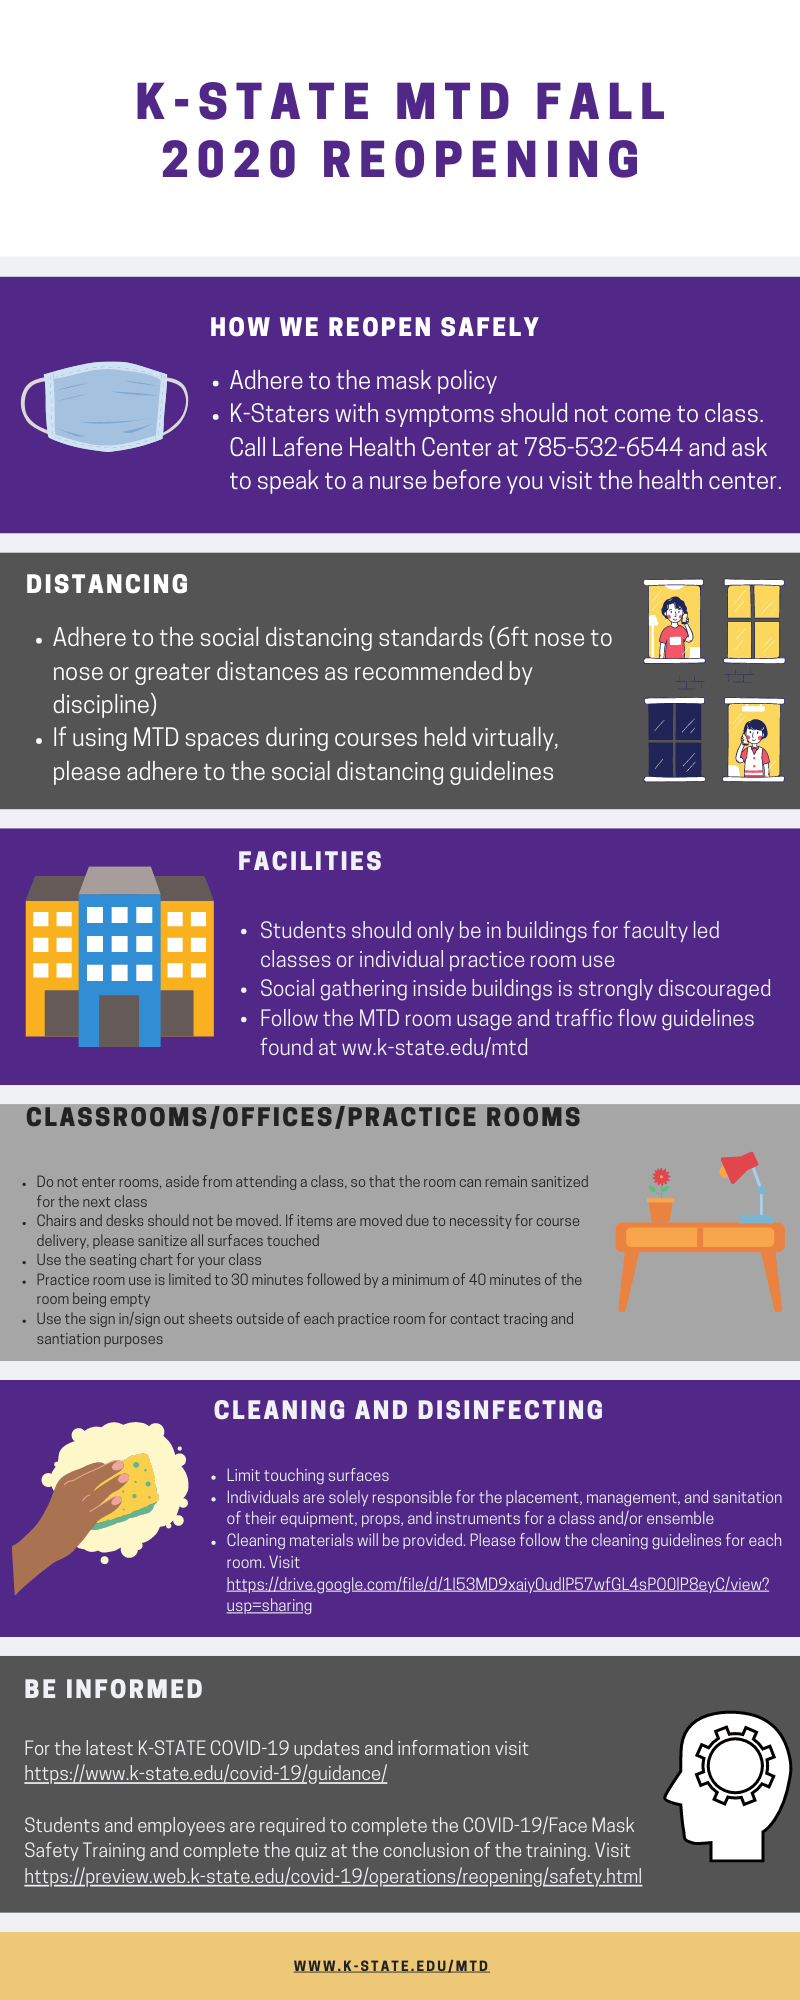 MTD Reopening Infographic - click for PDF version